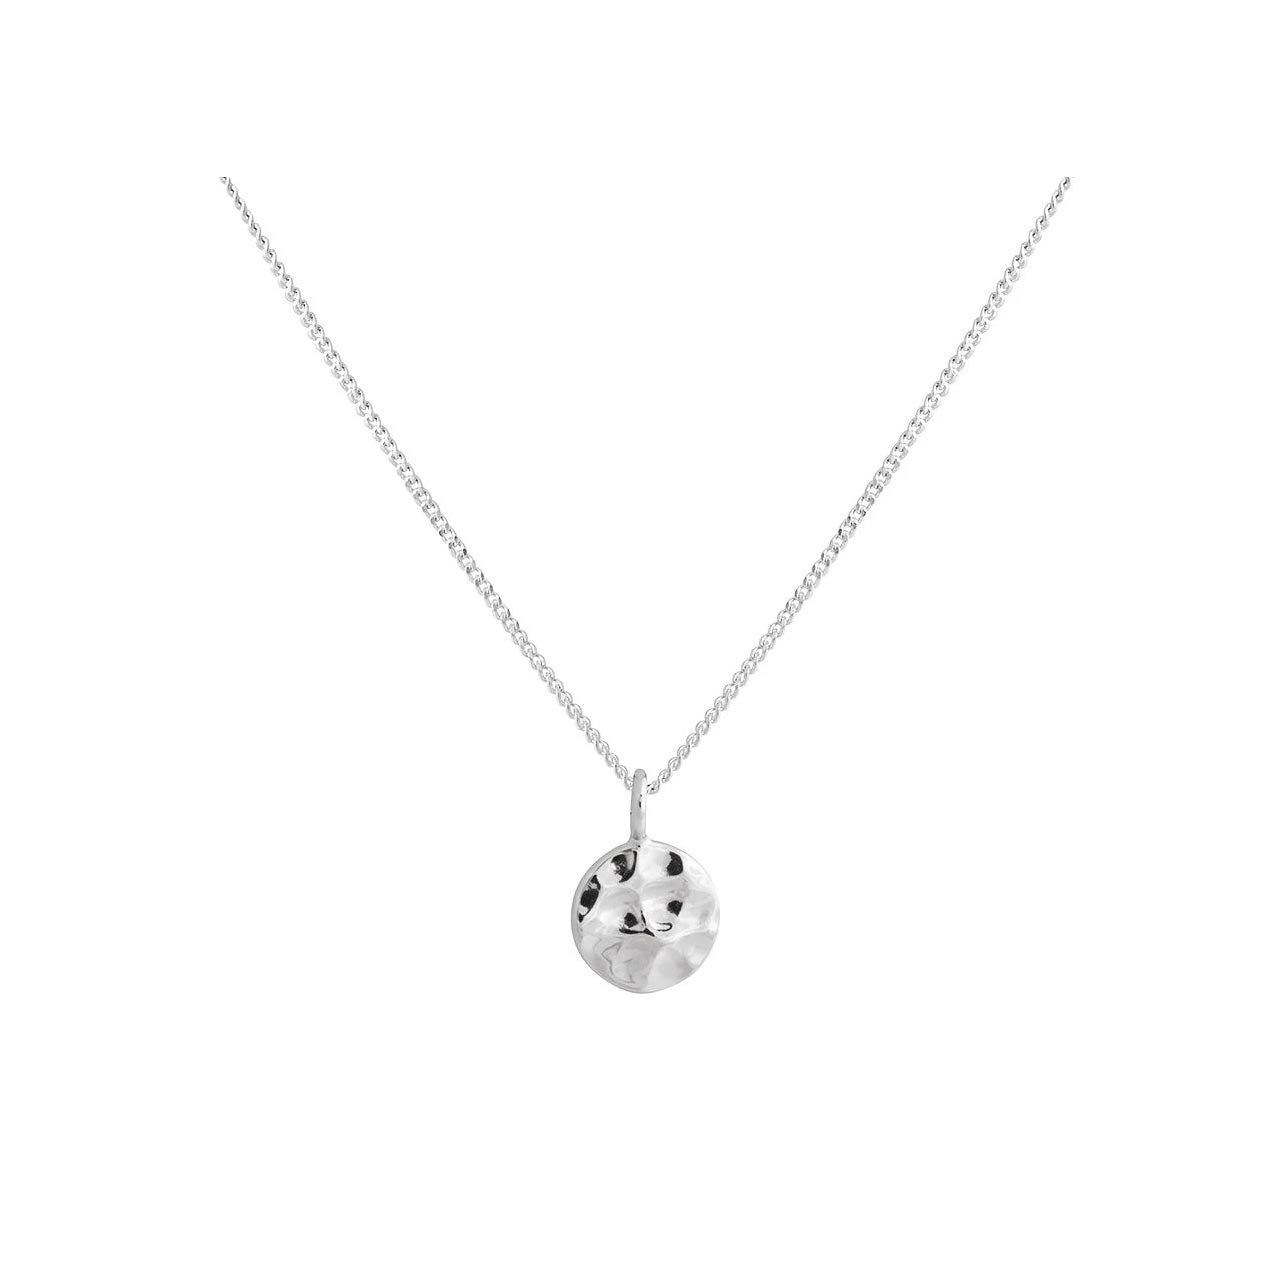 Lindi Kingi Deluxe Hammered Disc Necklace - Silver | Koop.co.nz